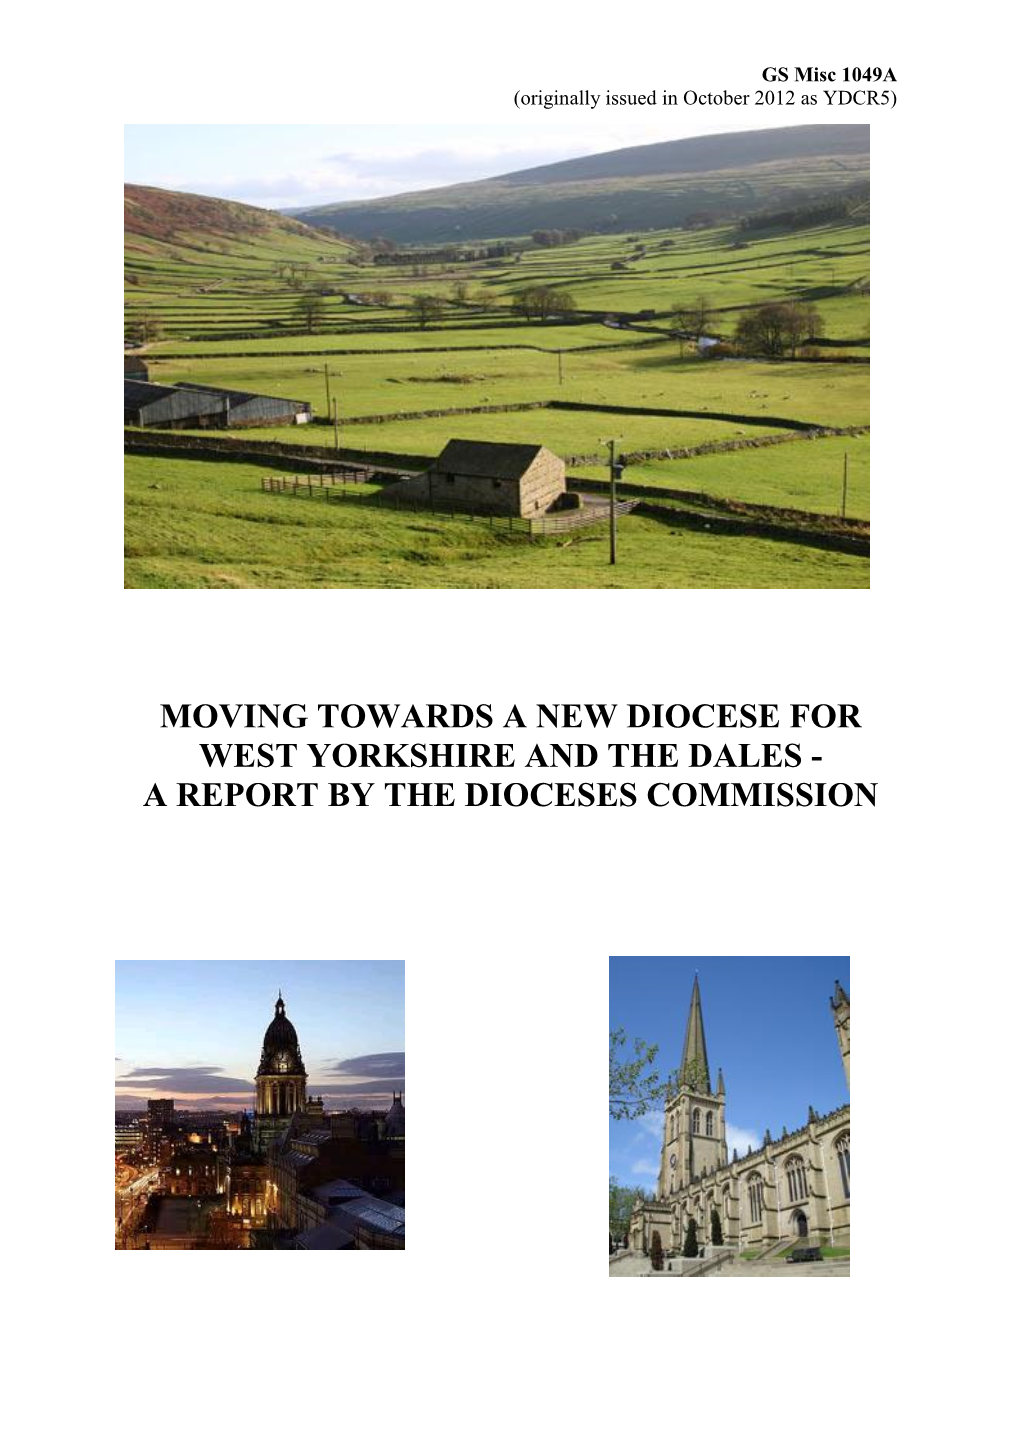 A Report by the Dioceses Commission